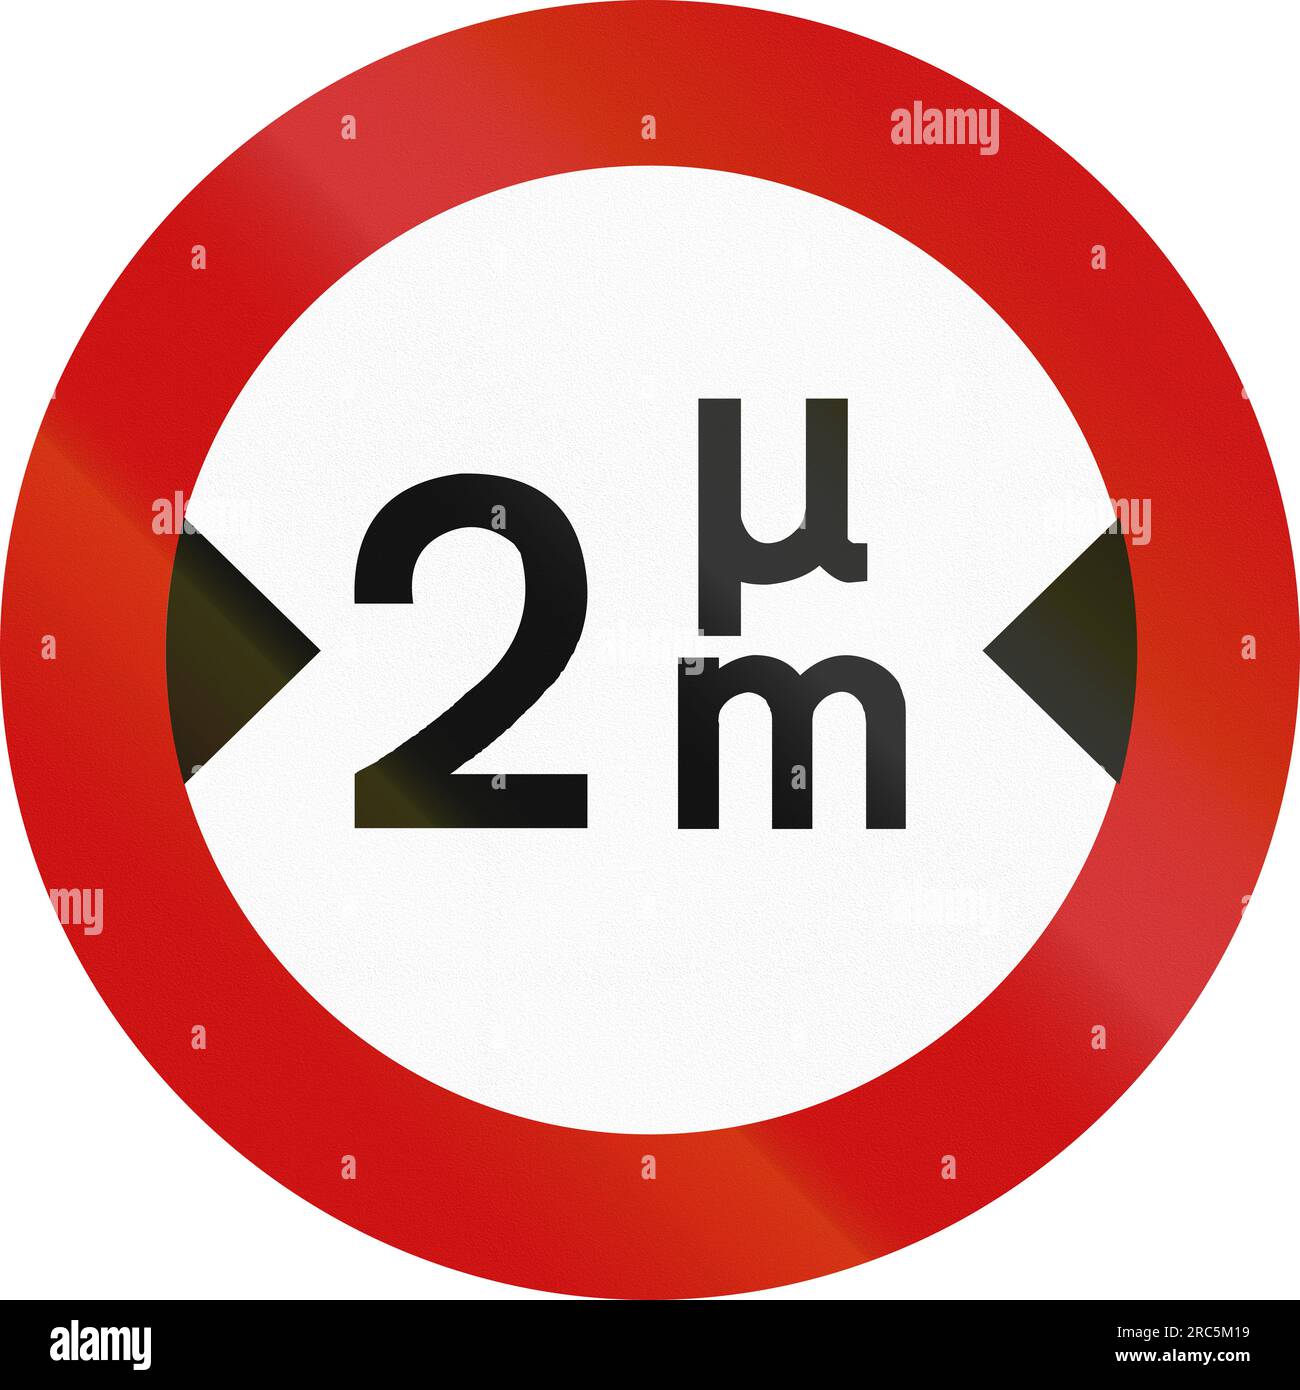 Greek sign prohibiting thoroughfare of vehicles with a width over 2 meters. The upper token is the Greek letter m/mu. Stock Photo